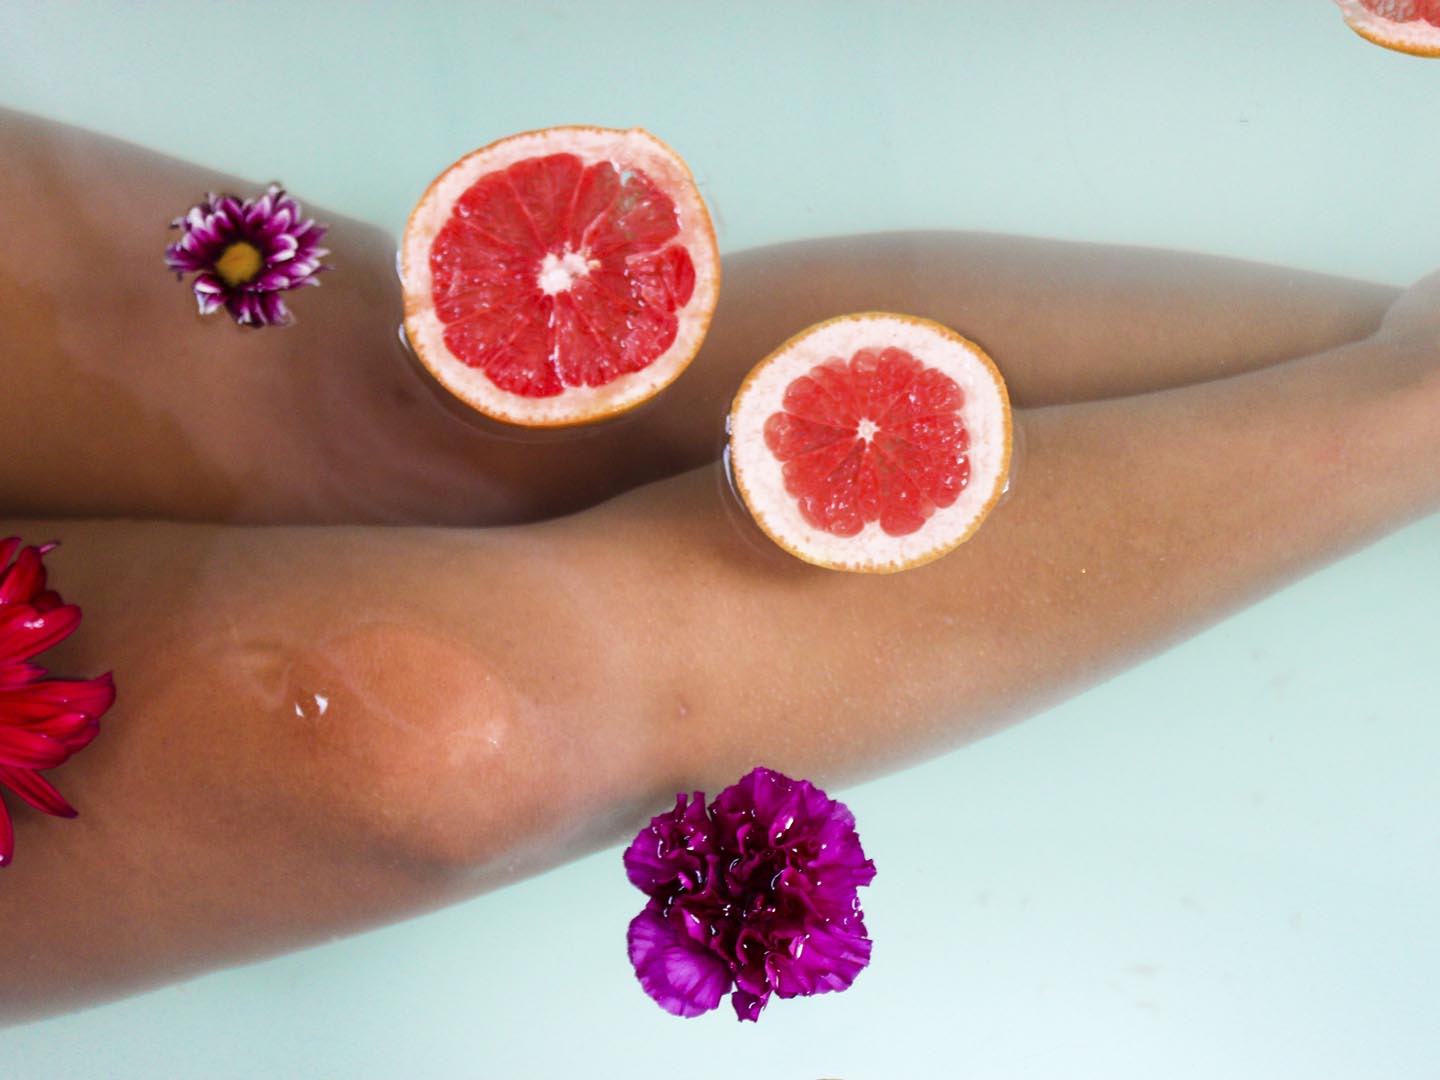 Woman soaking her legs in a relaxing tub with citrus and botanicals at the spa.